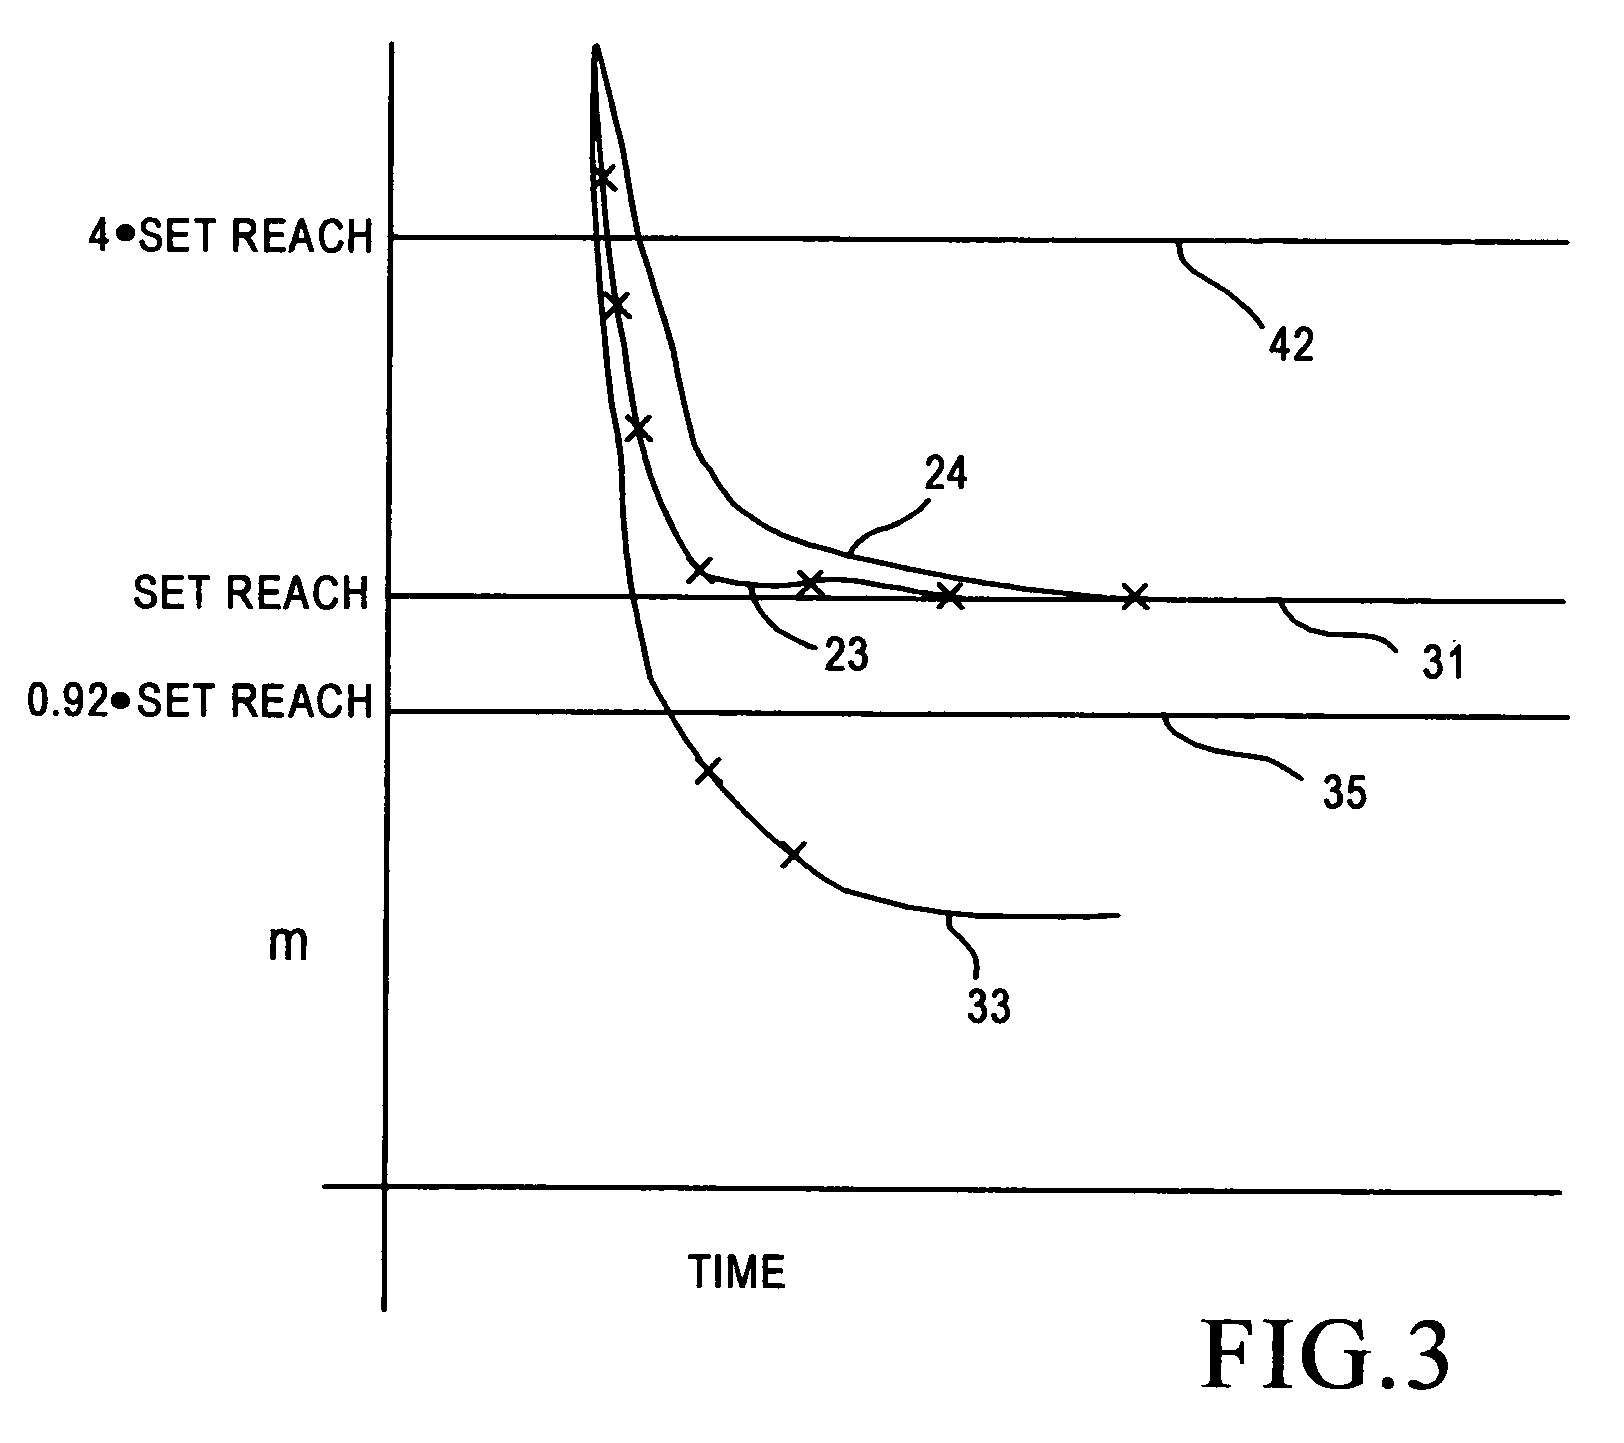 Protective relay for power systems having fault distance measurement filter logic